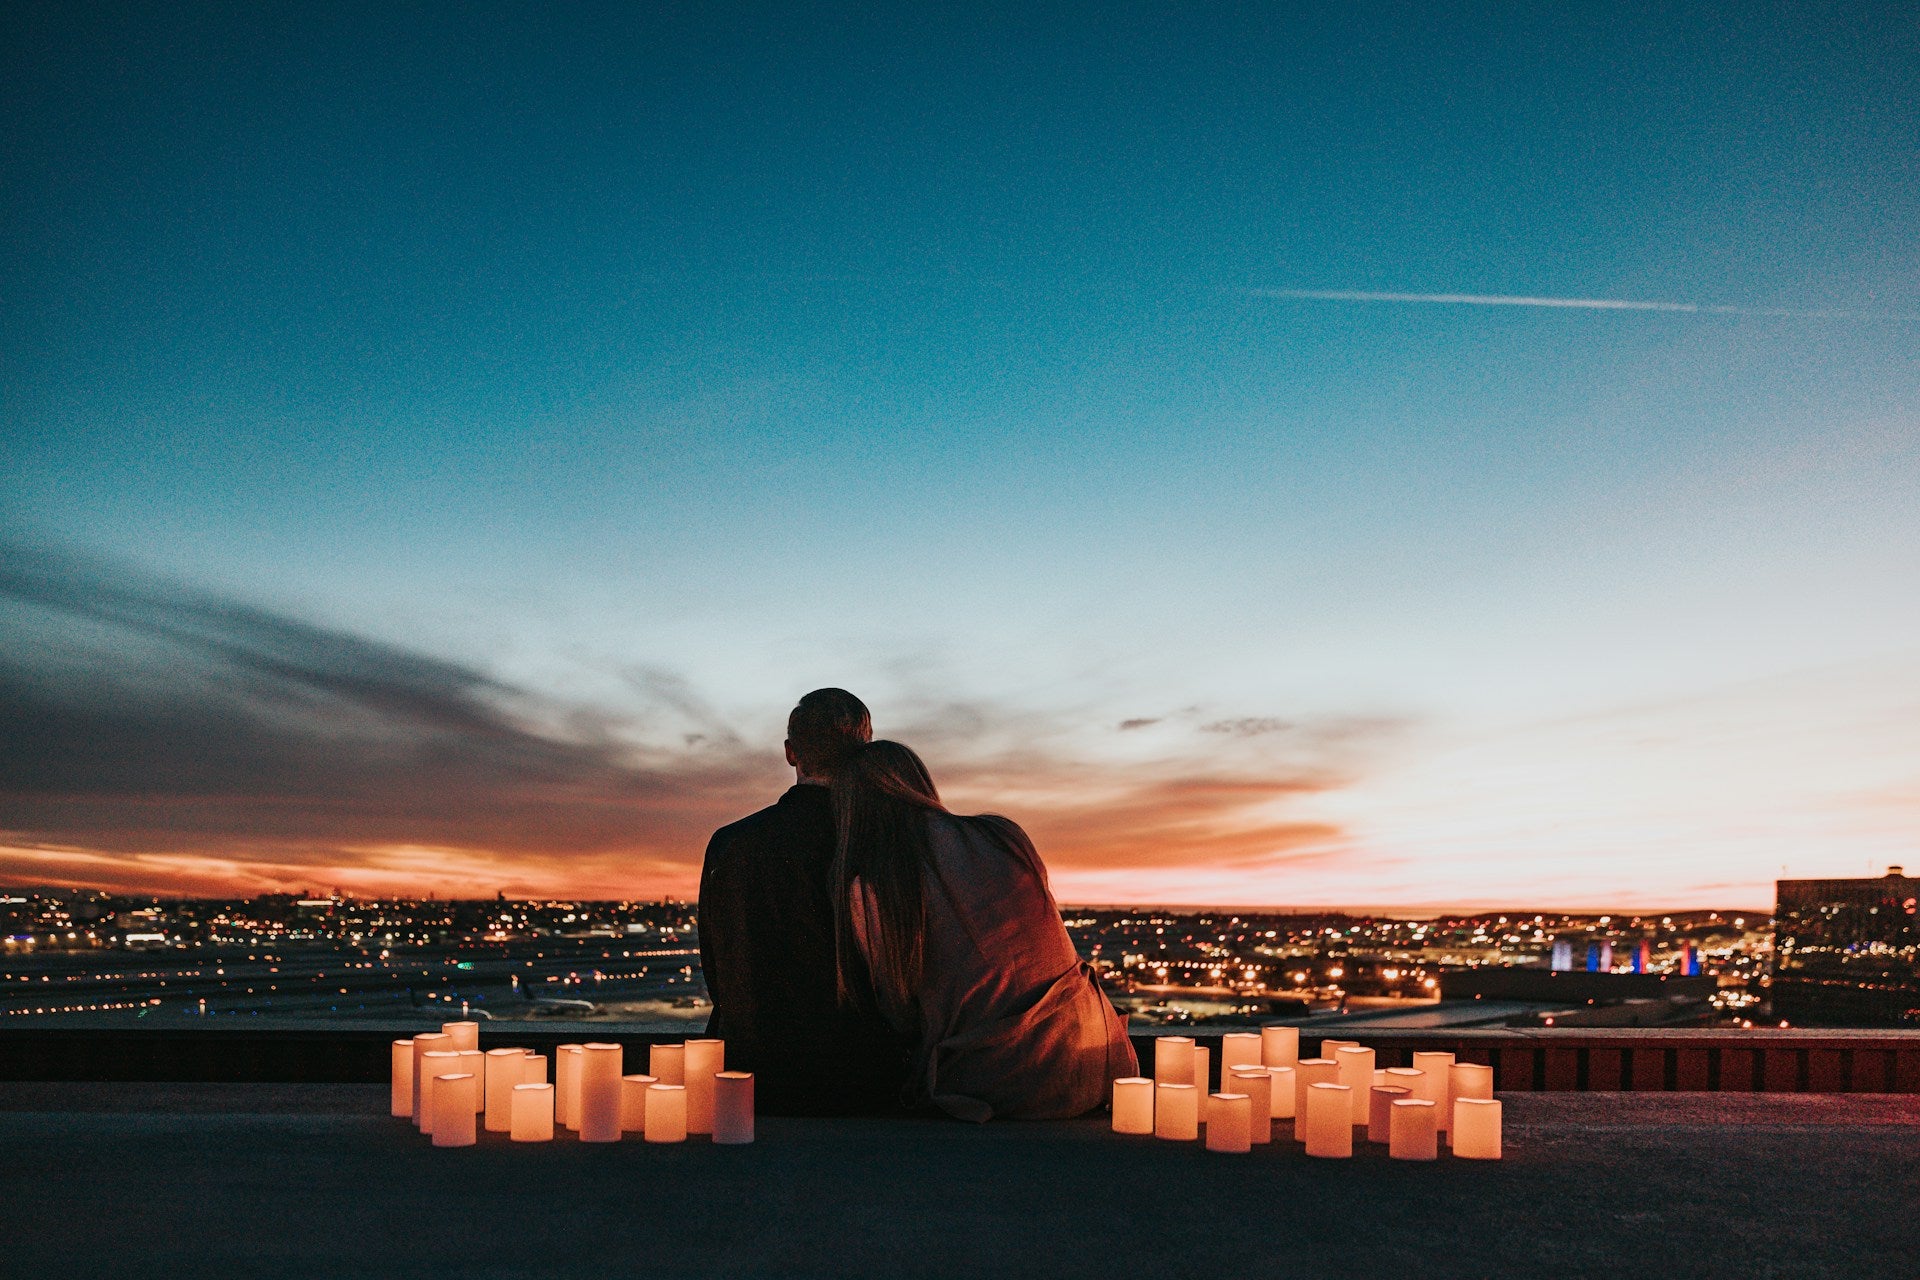 A couple surrounded by candles watching a sunset